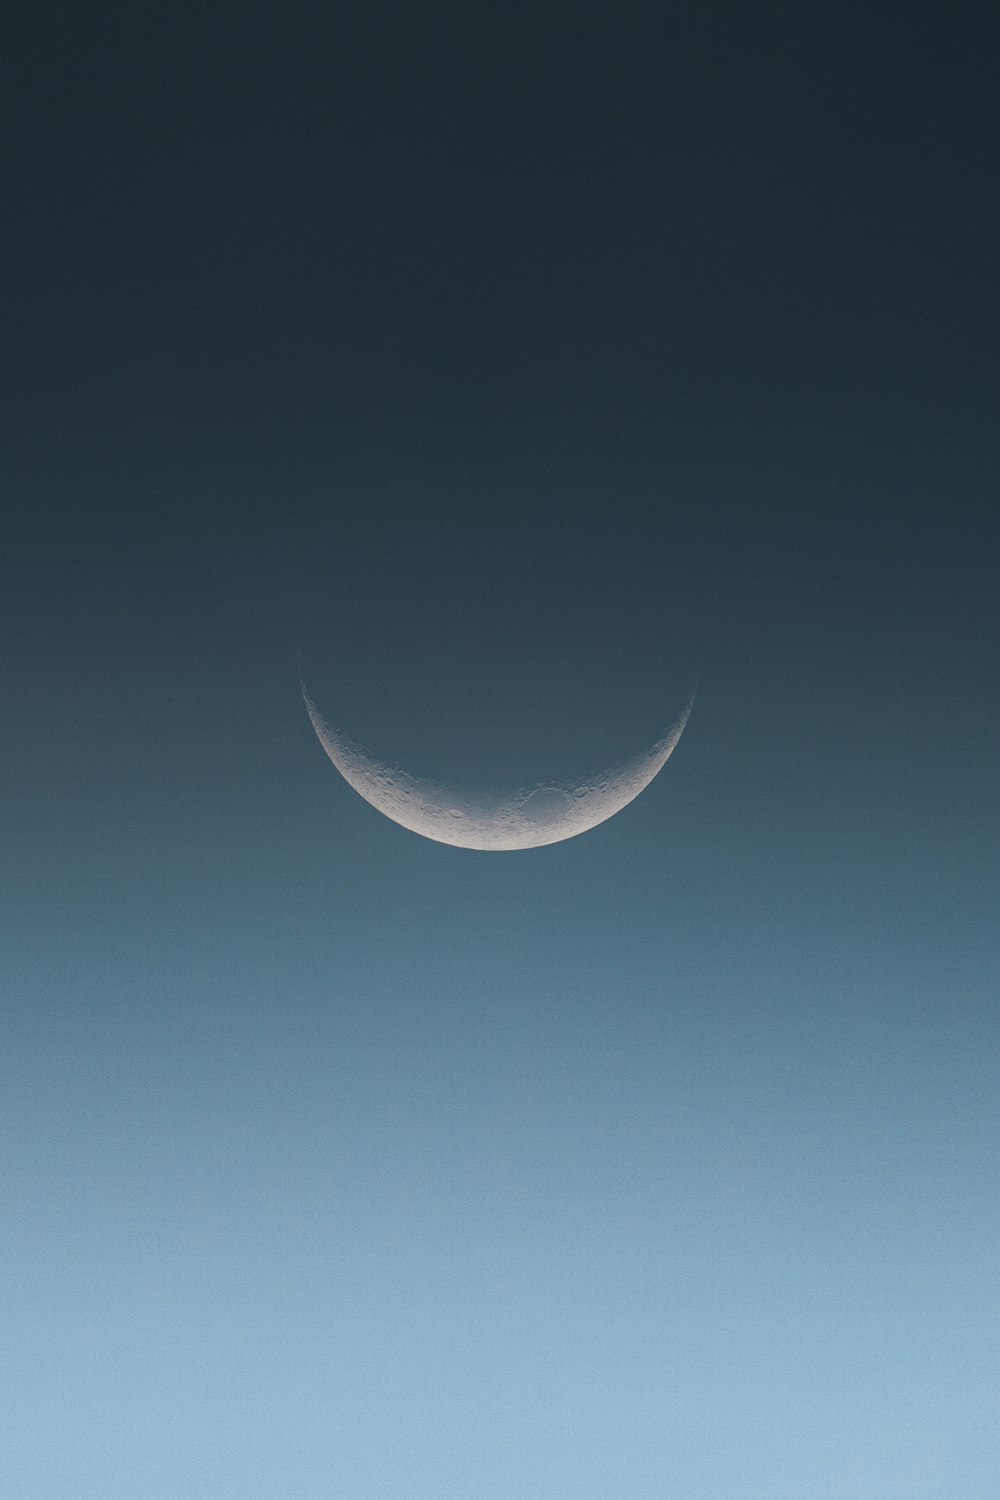 a crescent moon is seen in the sky